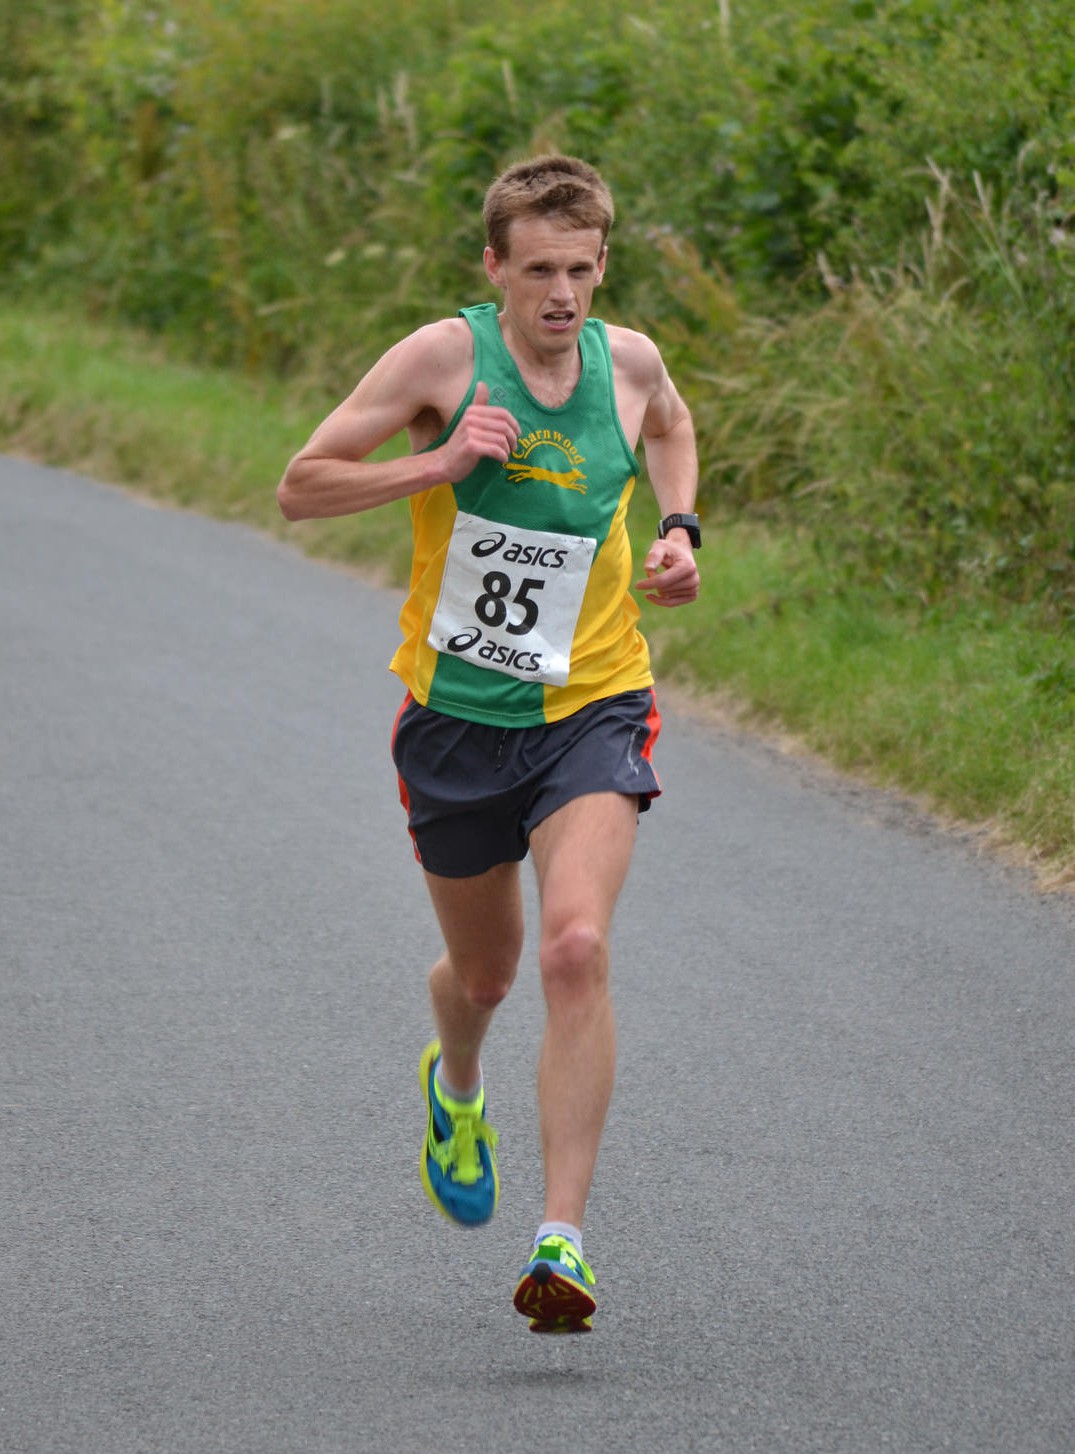 Mark Couldwell of Charnwood AC won the 2015 Timberhonger 10k in a time of 33'24"